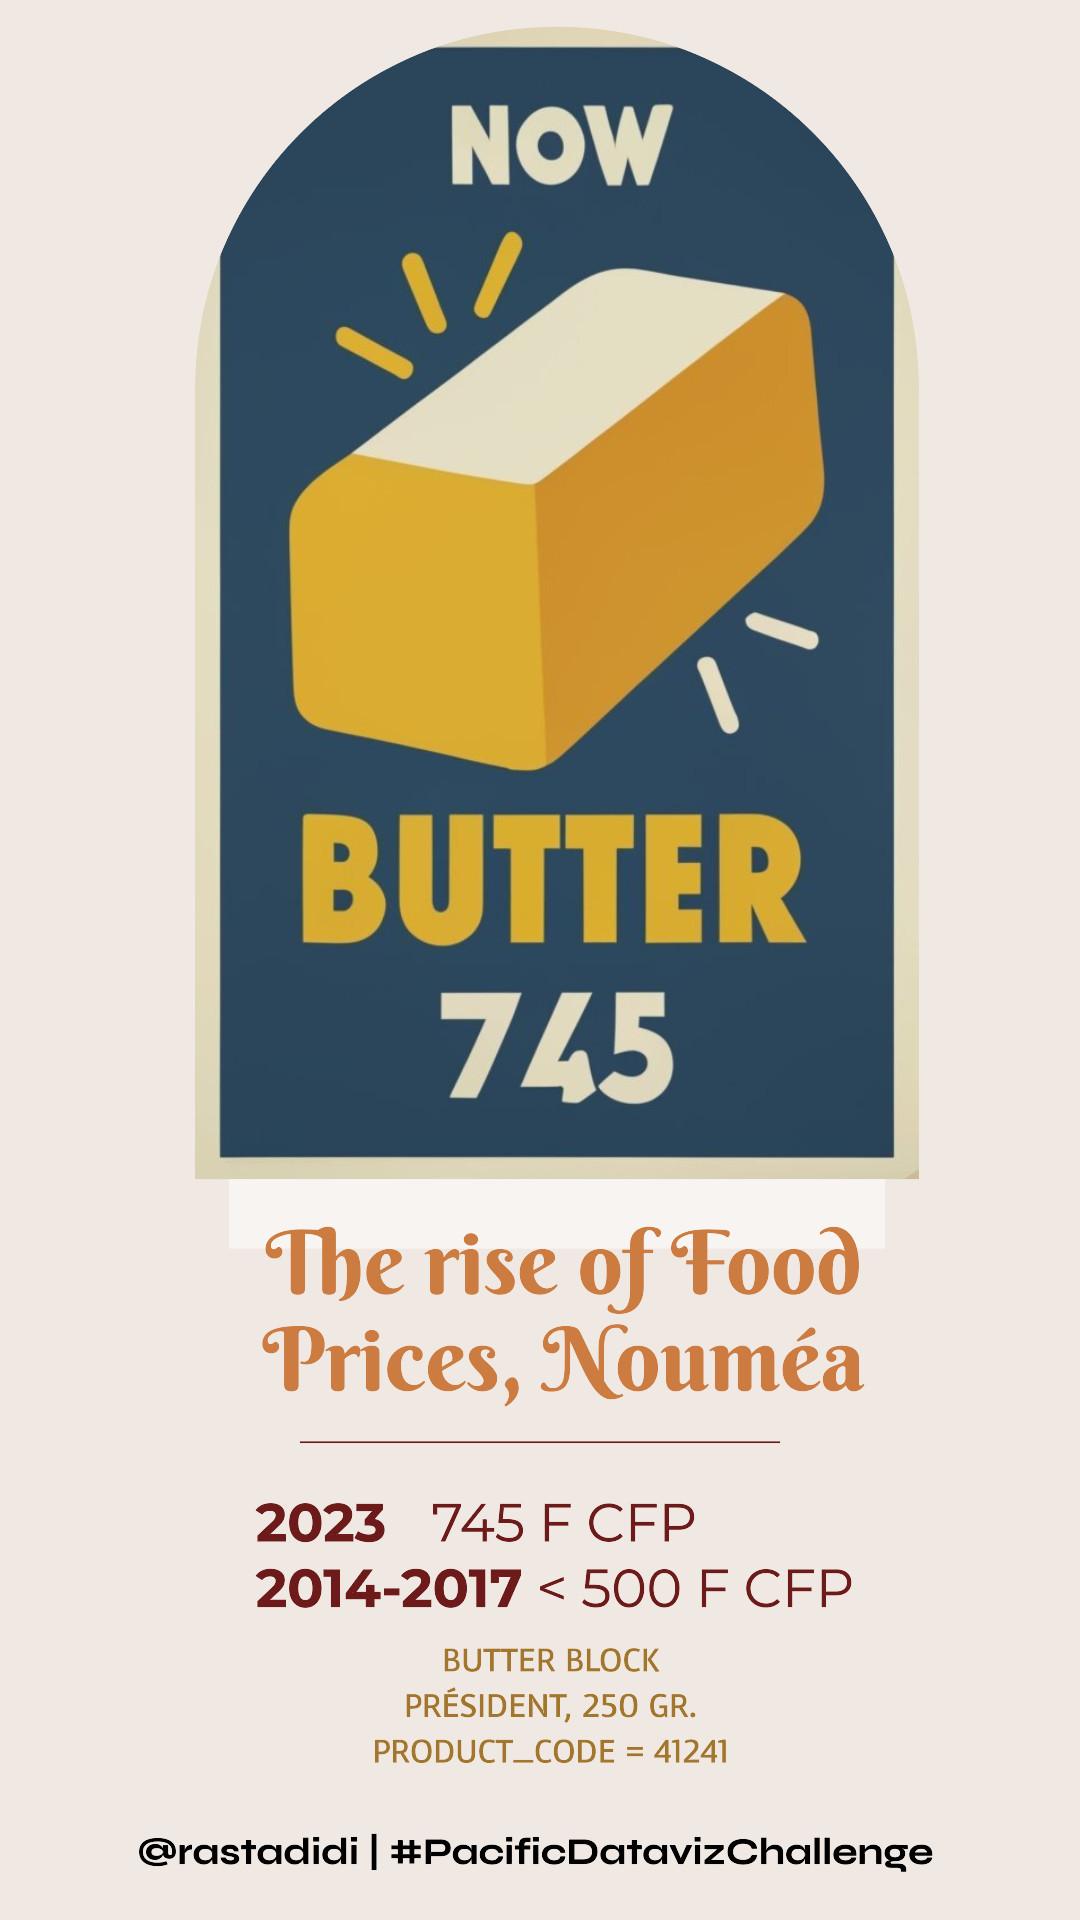 The rise of butter price at Nouméa